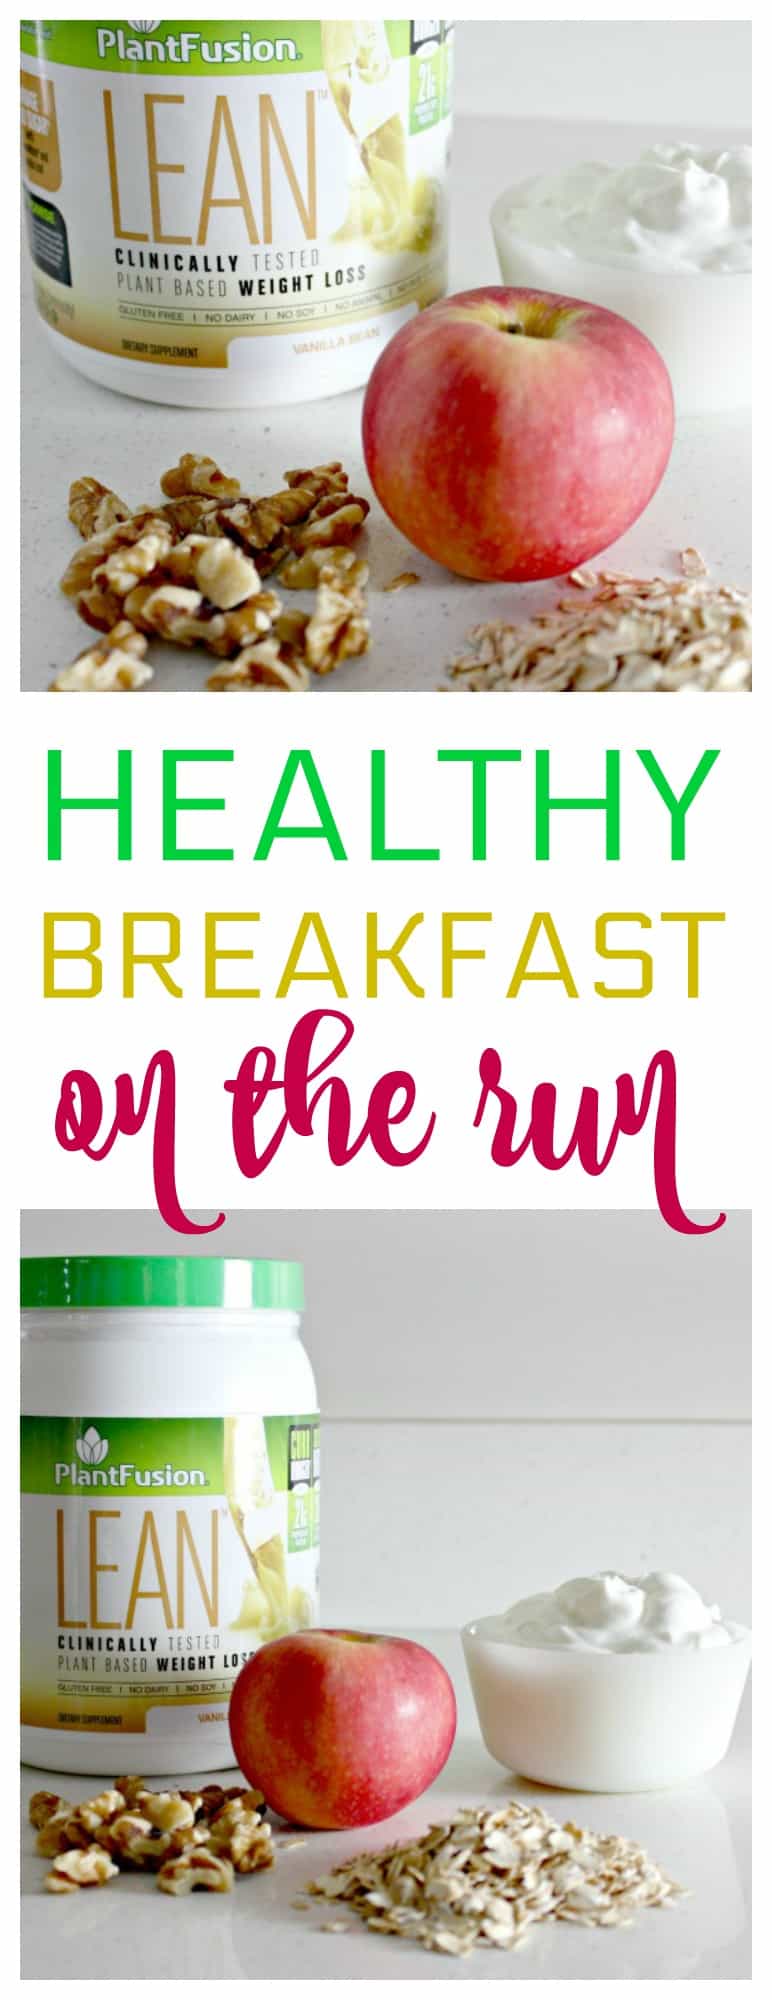 Healthy Breakfast on the Run: How to Make One and Why